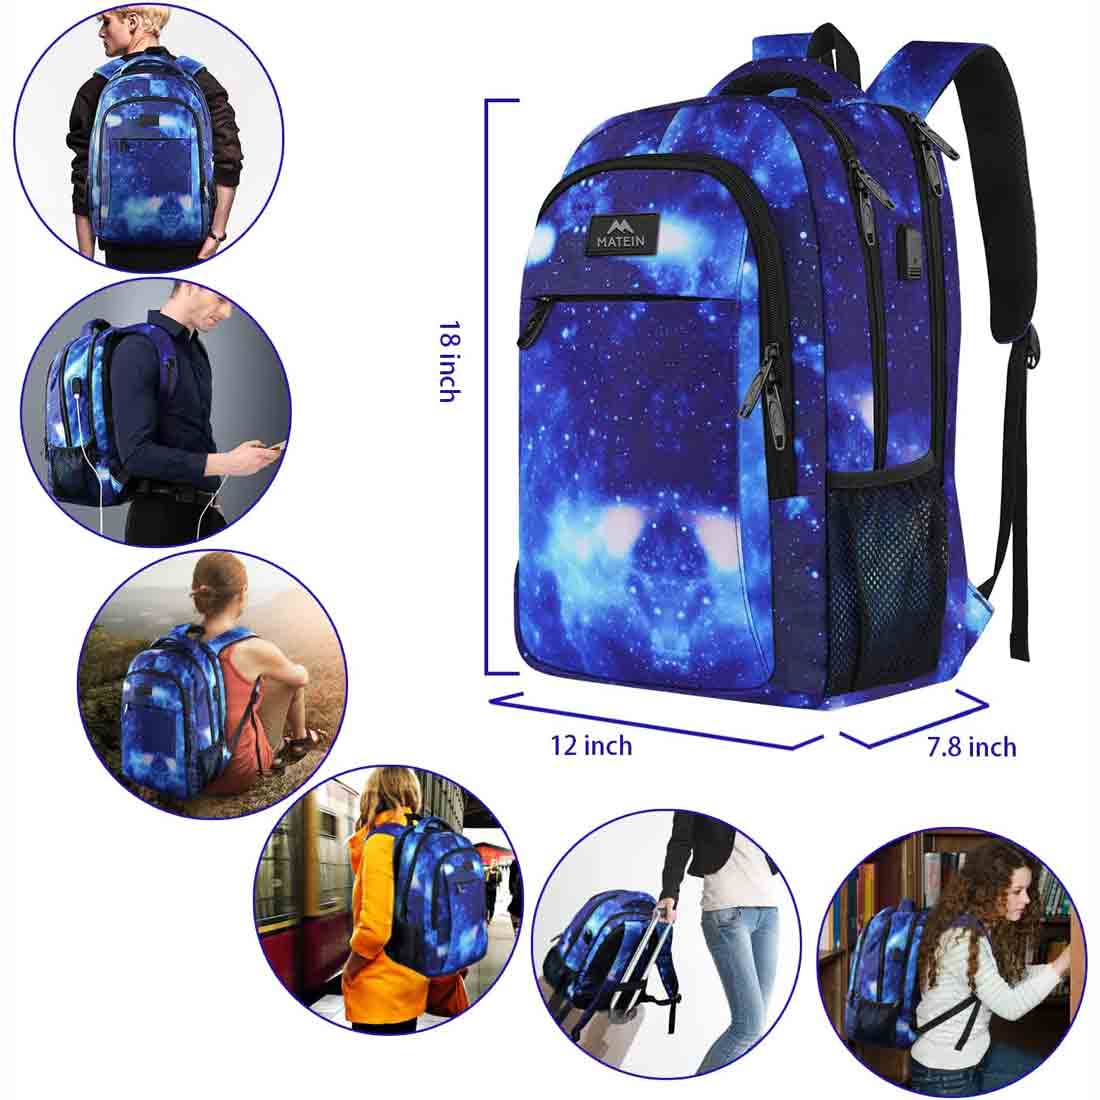 Matein Mlassic Galaxy Travel Laptop Backpack for College